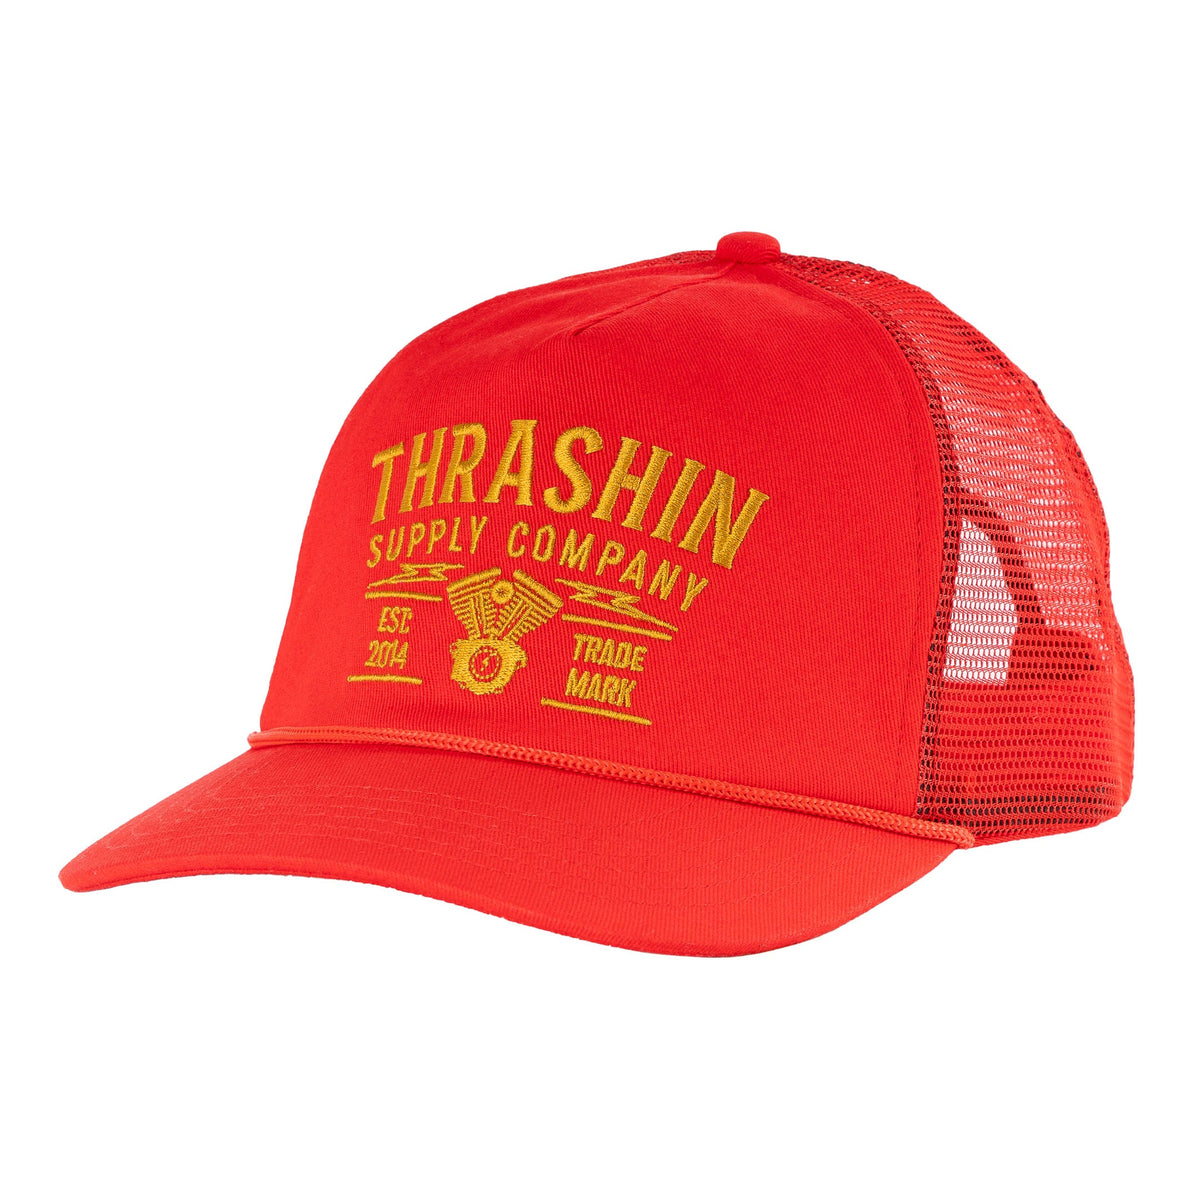 Union Trucker Snapback - Red  | Unstructured Slightly Curved Bill